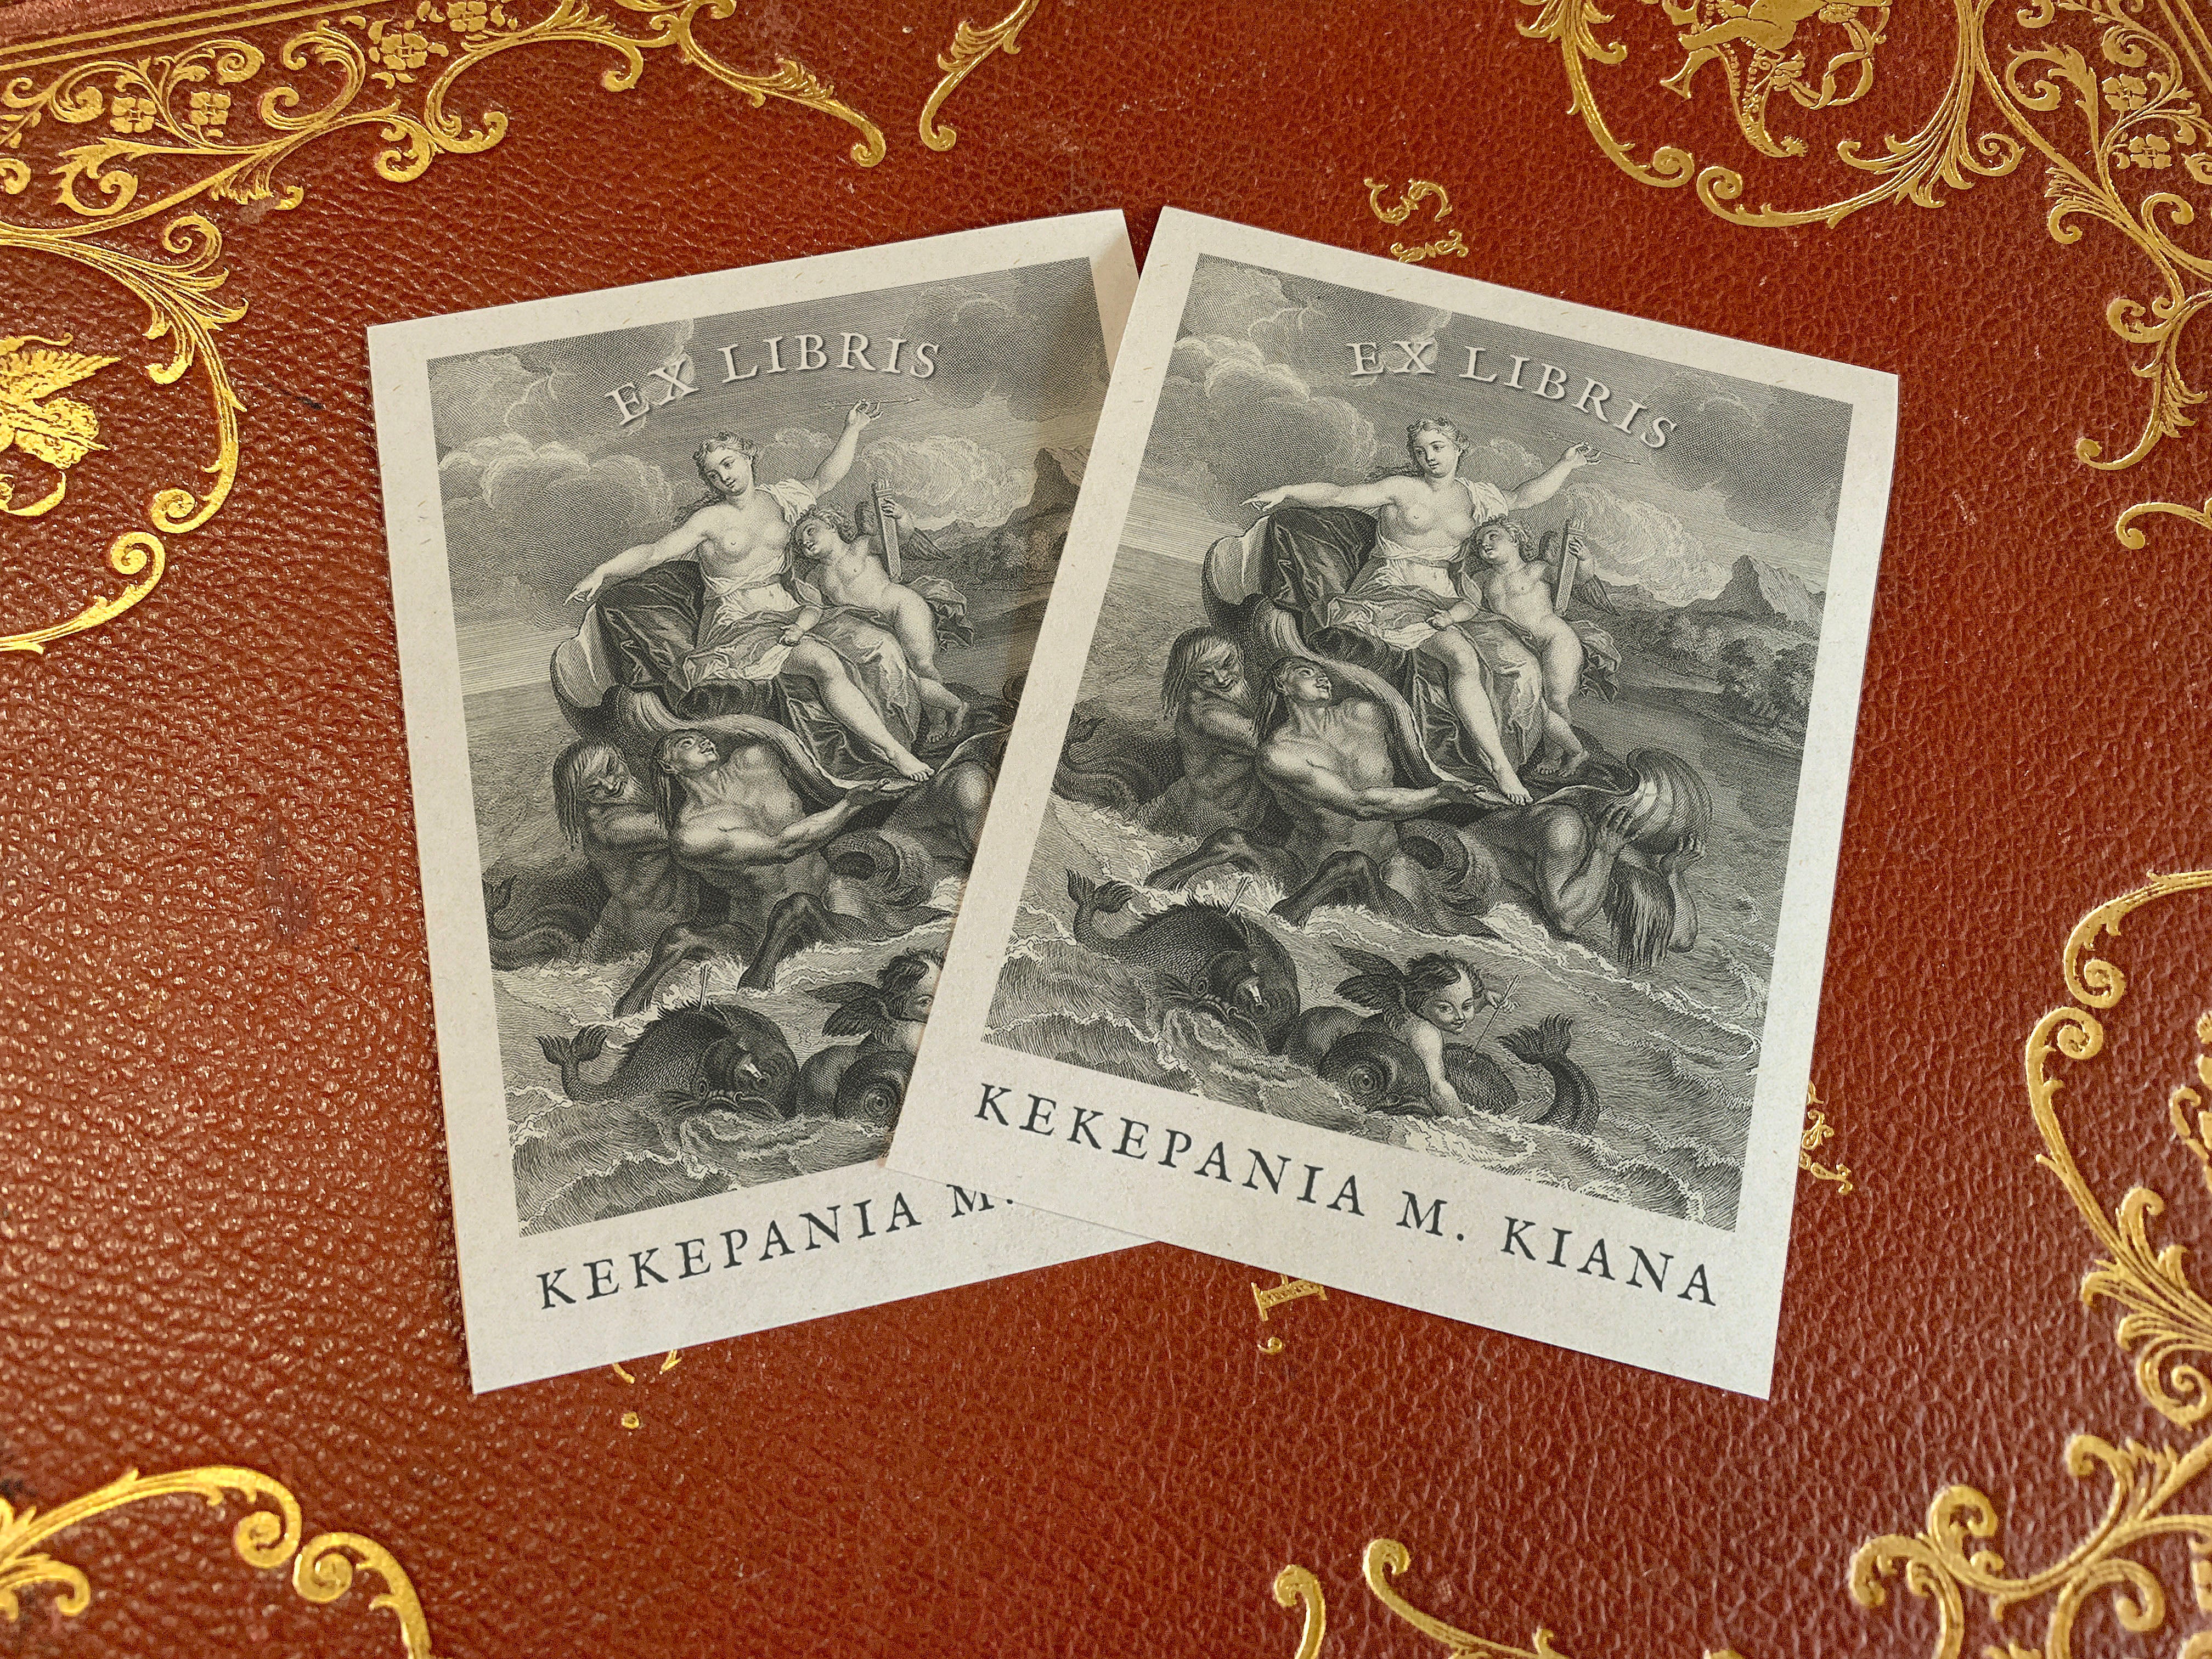 Triumph of the Marine Venus, Personalized Ex-Libris Bookplates, Crafted on Traditional Gummed Paper, 3in x 4in, Set of 30